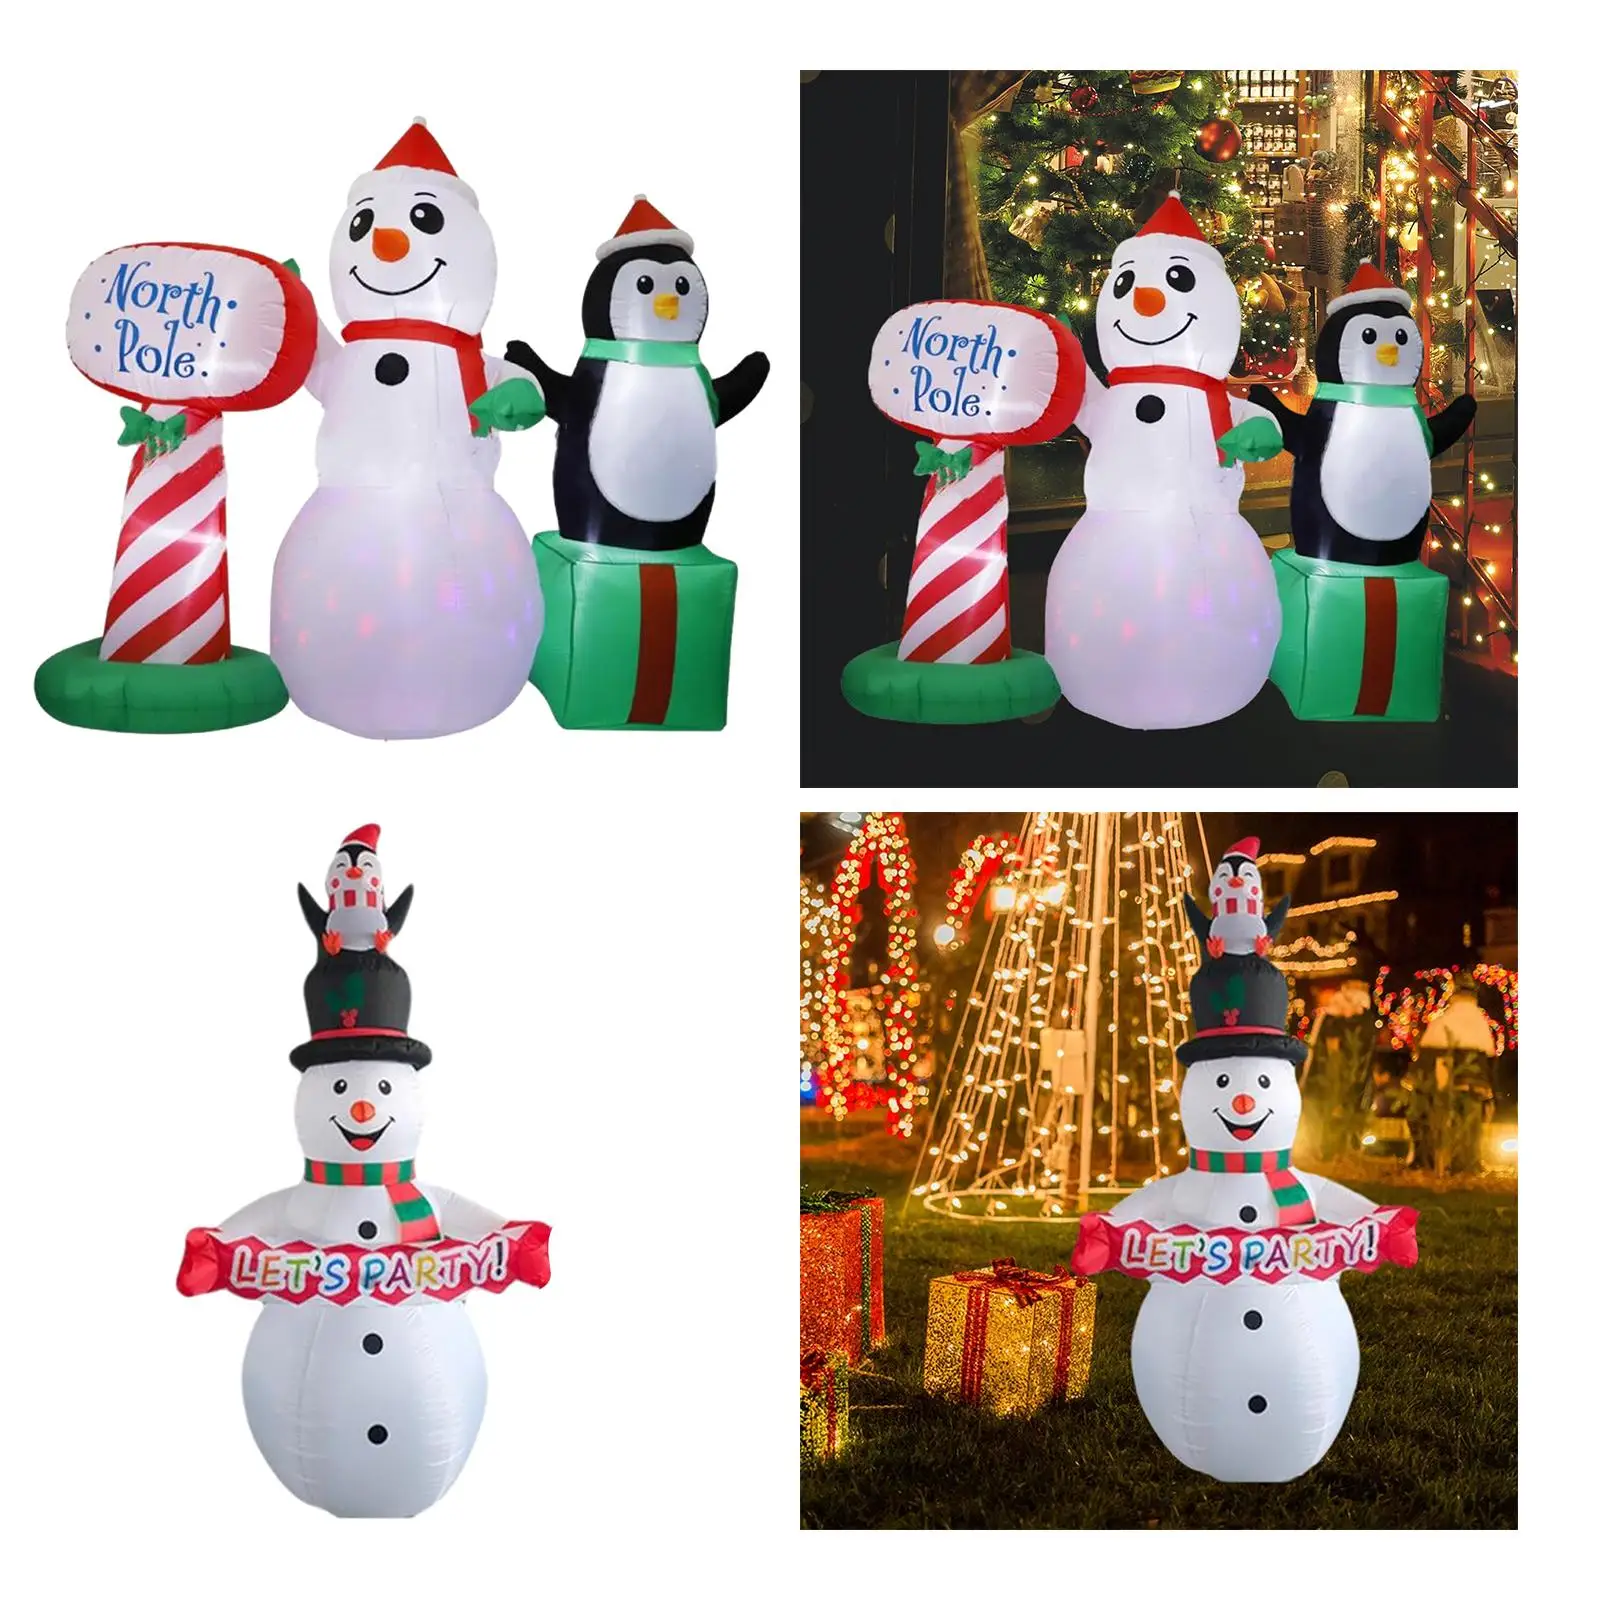 Blow up Snowman Large Funny Christmas Decoration Inflatable Snowman Christmas Inflatables for Outdoor Garden Yard Outside Lawn